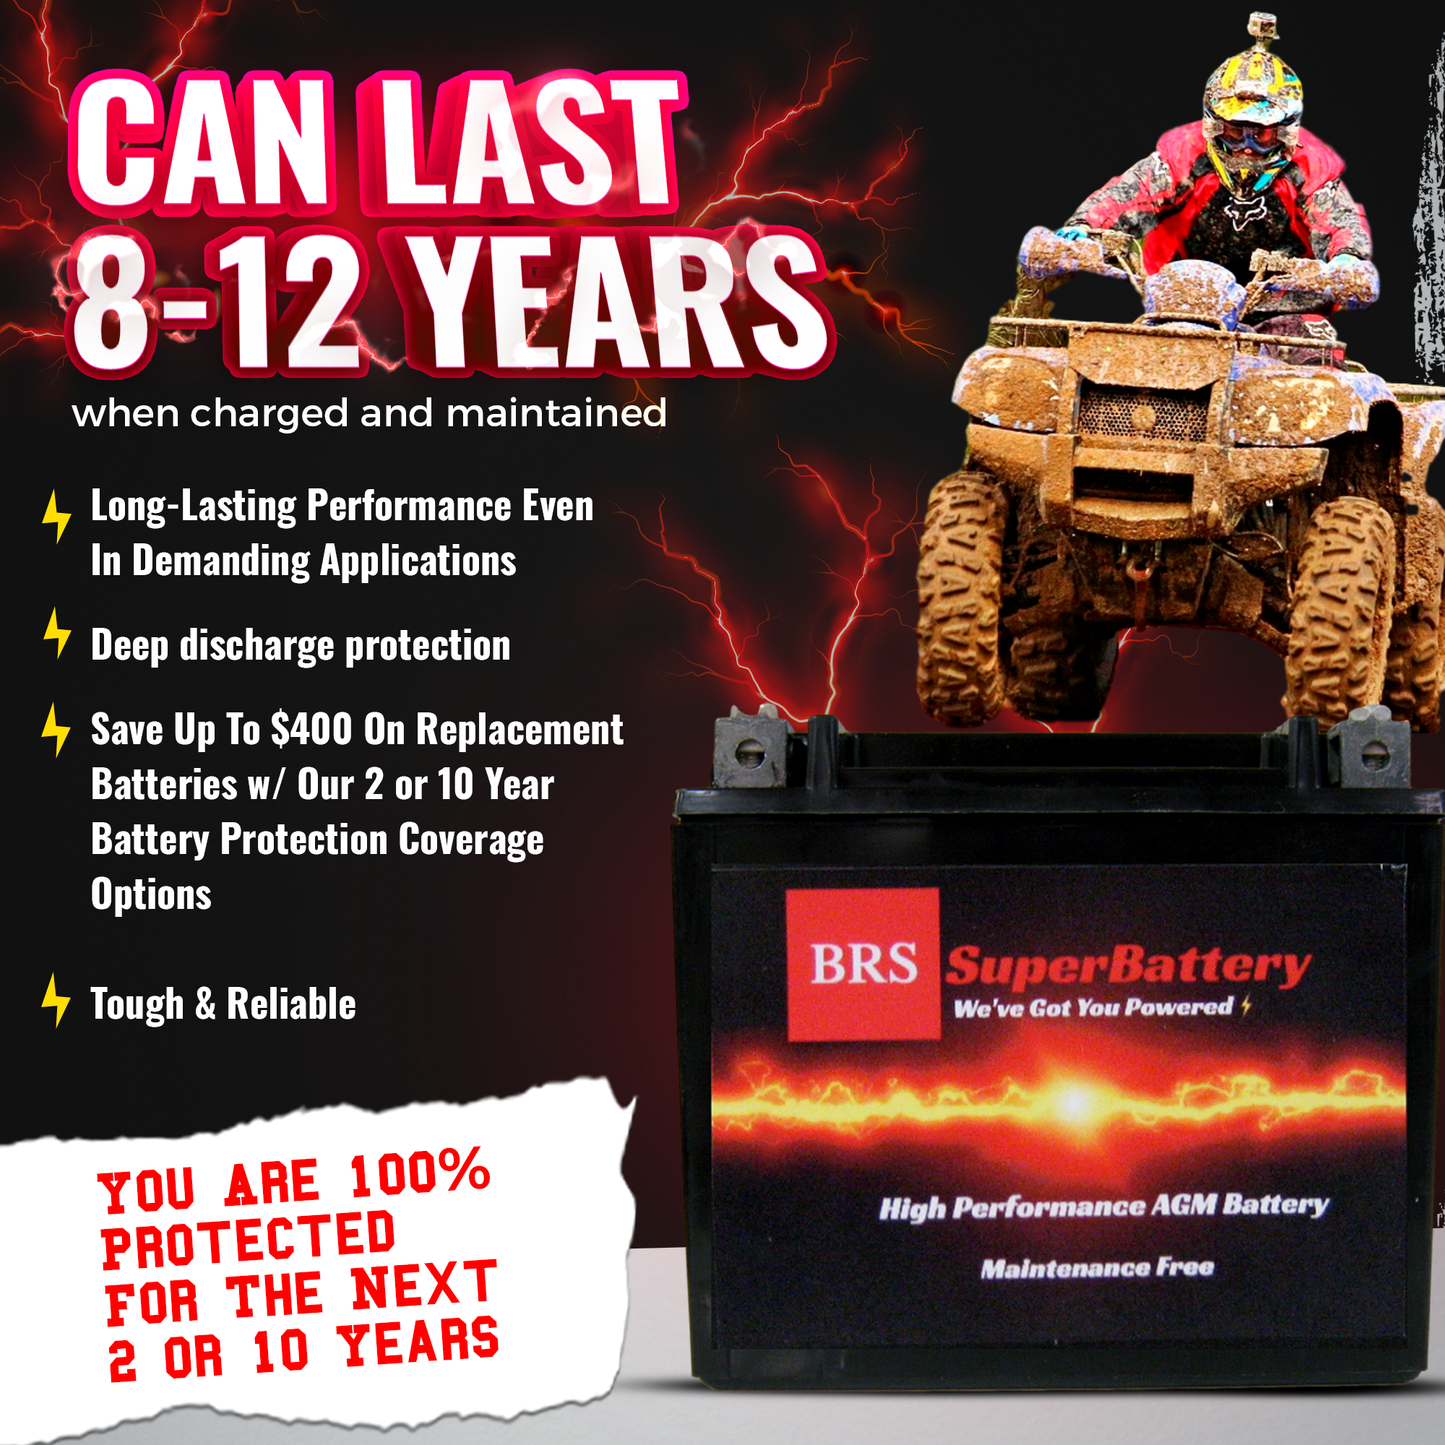 BRS5L-BS 12v High Performance Sealed AGM PowerSport 10 Year Battery - BRS Super Battery